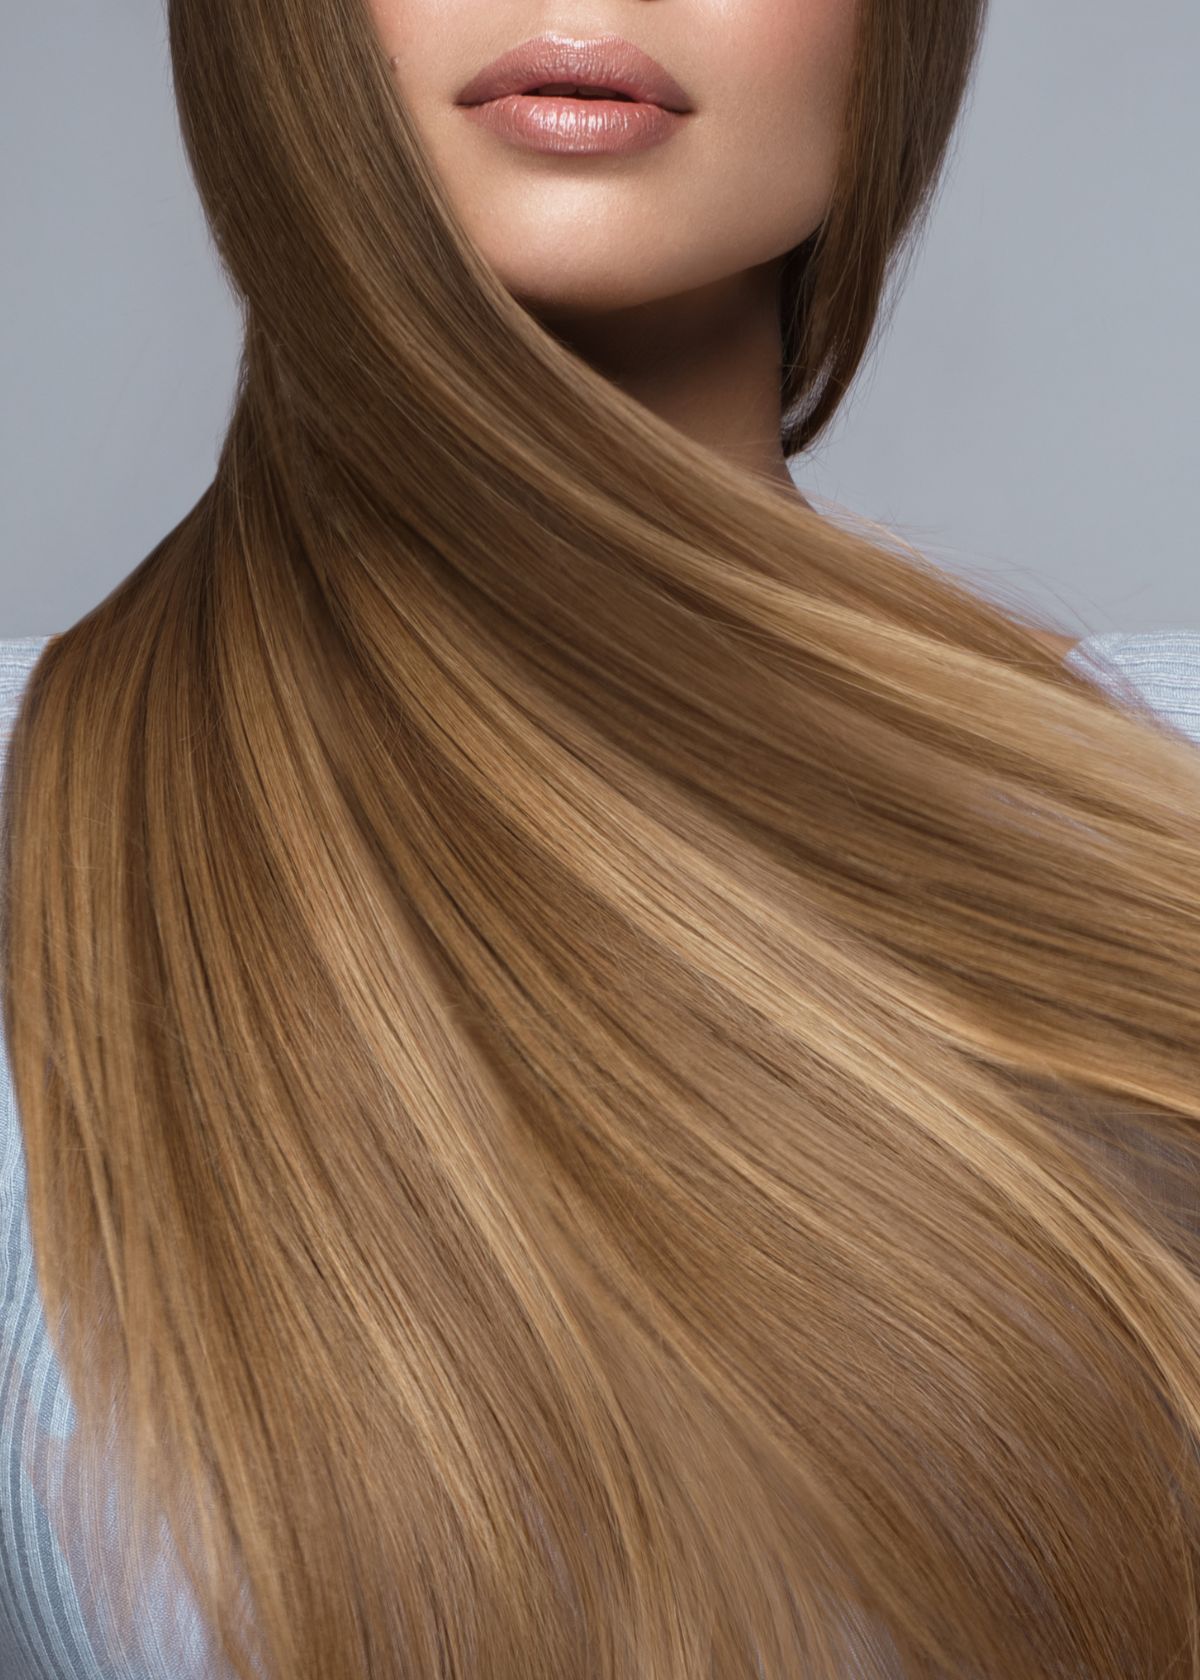 How to Maintain Your Hair After Brazilian Blowout 